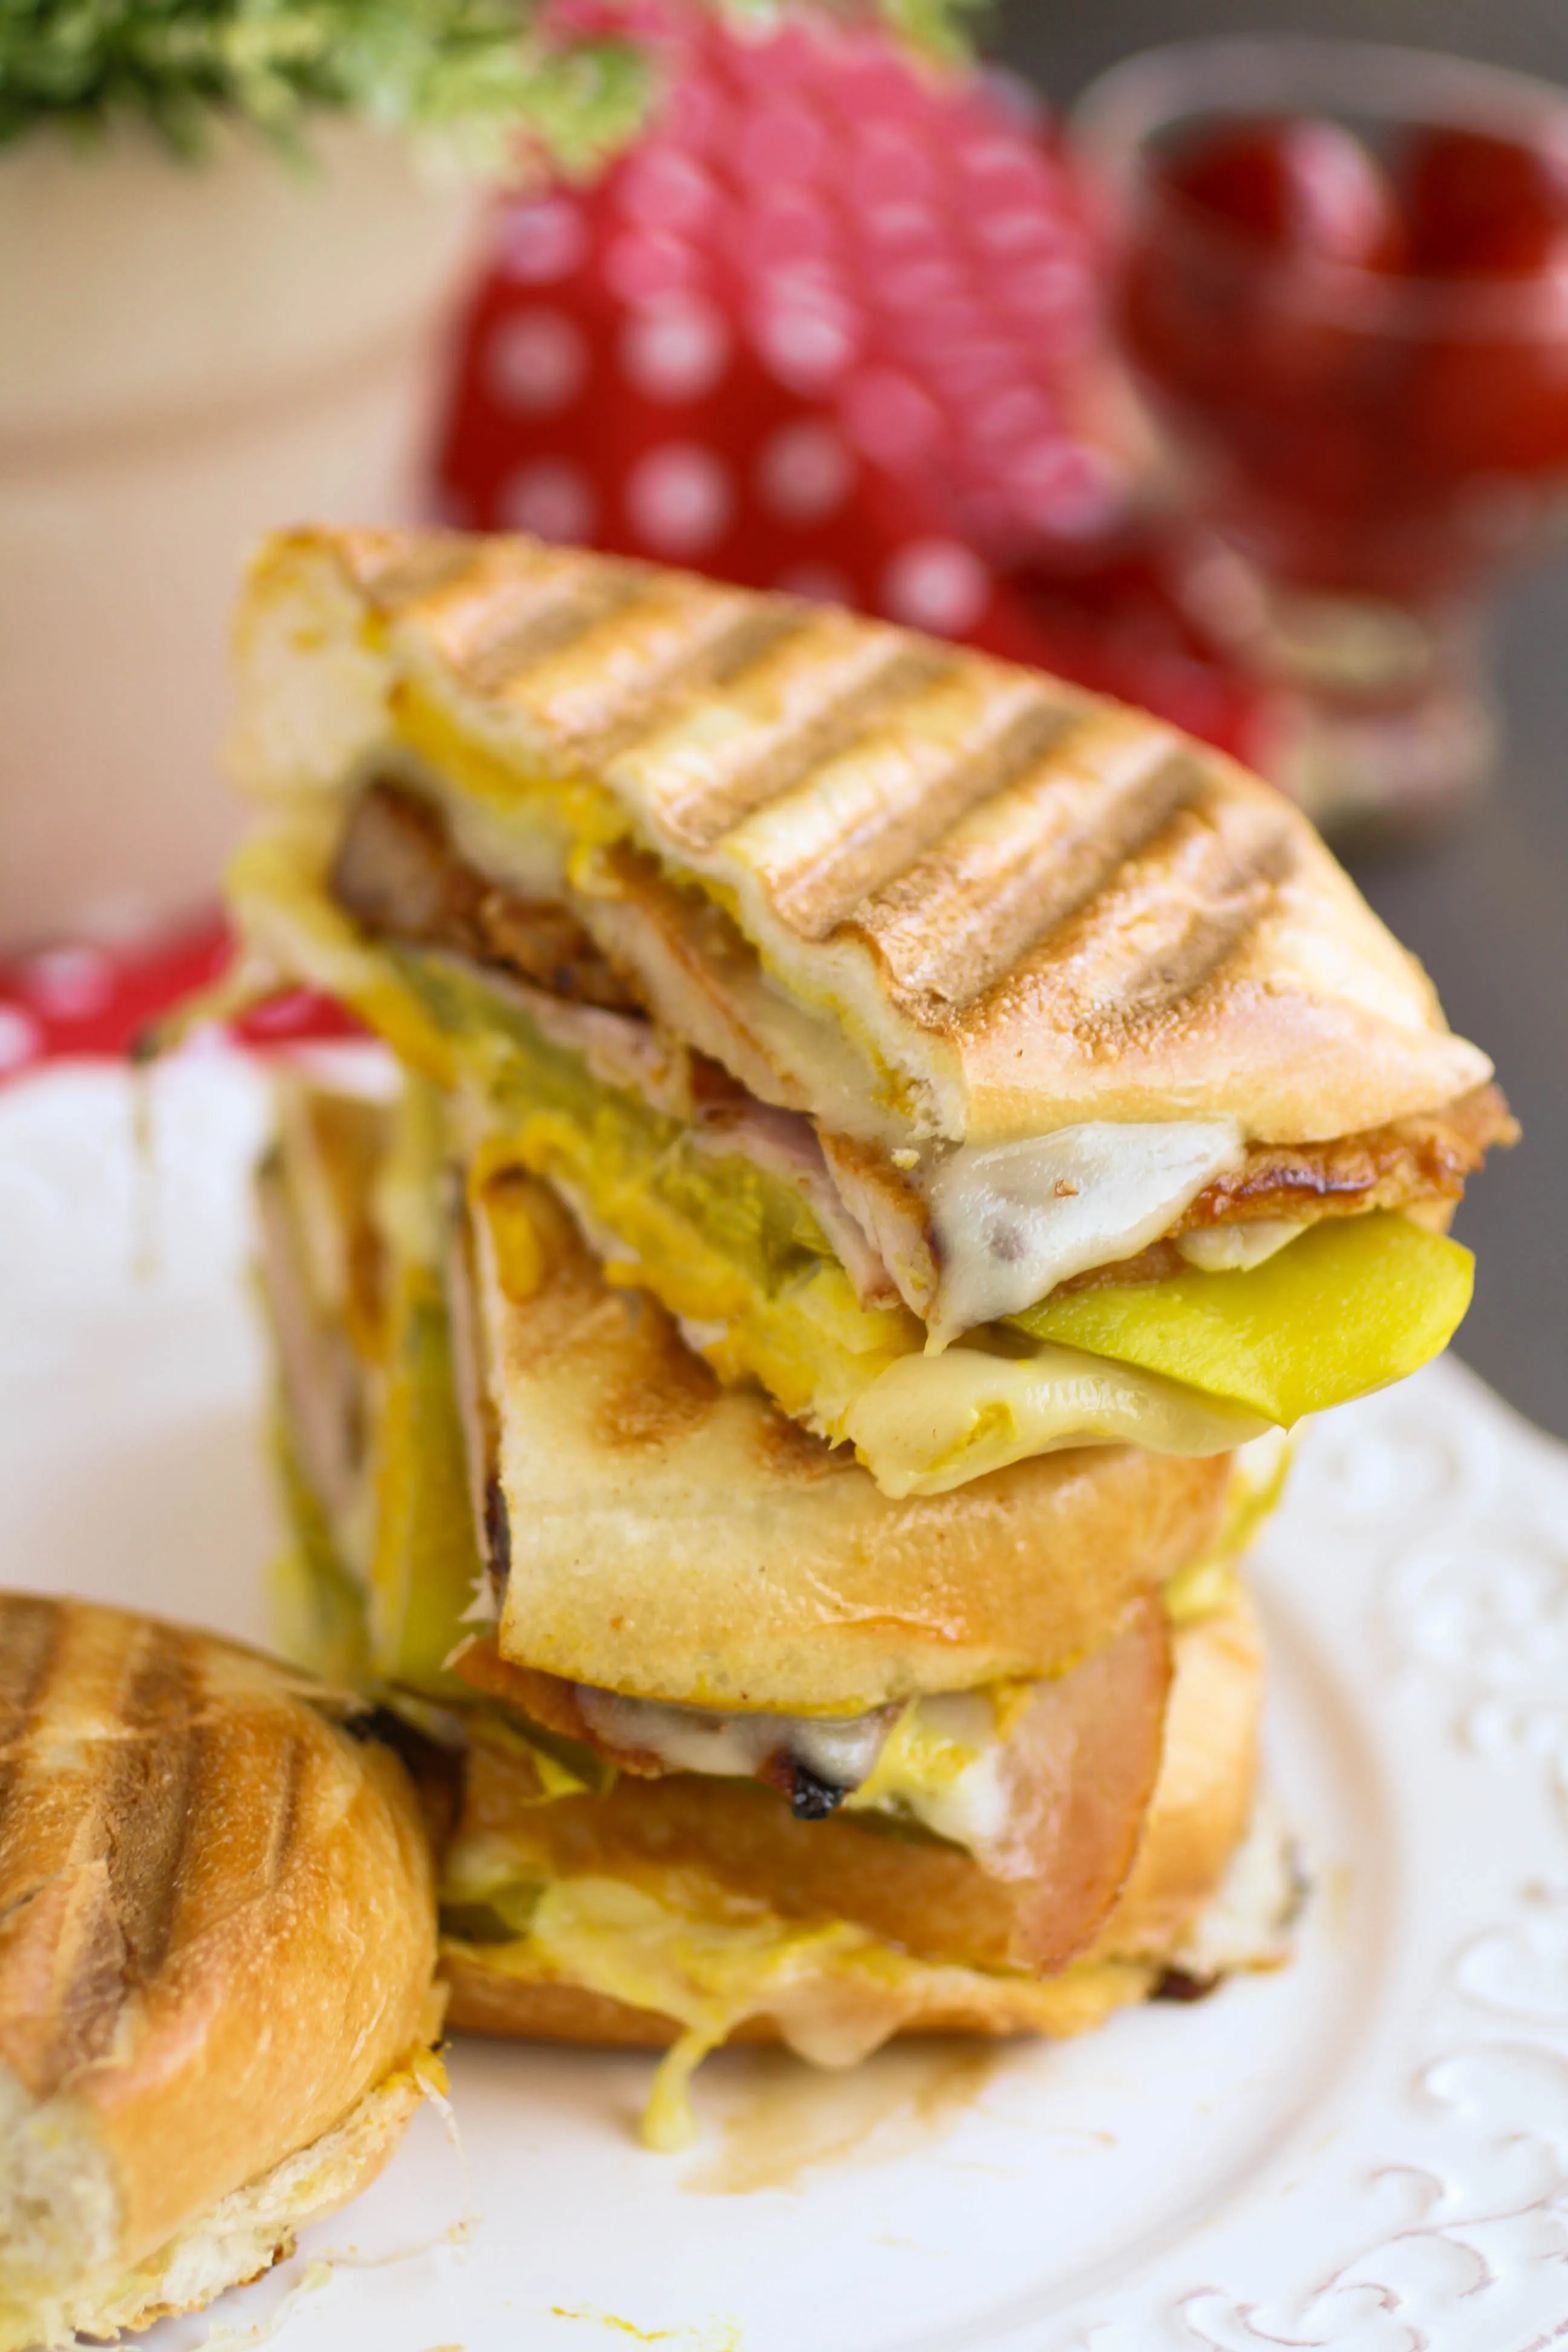 A Cuban sandwich is thick, hearty, and big on flavor. I hope you try this sandwich!